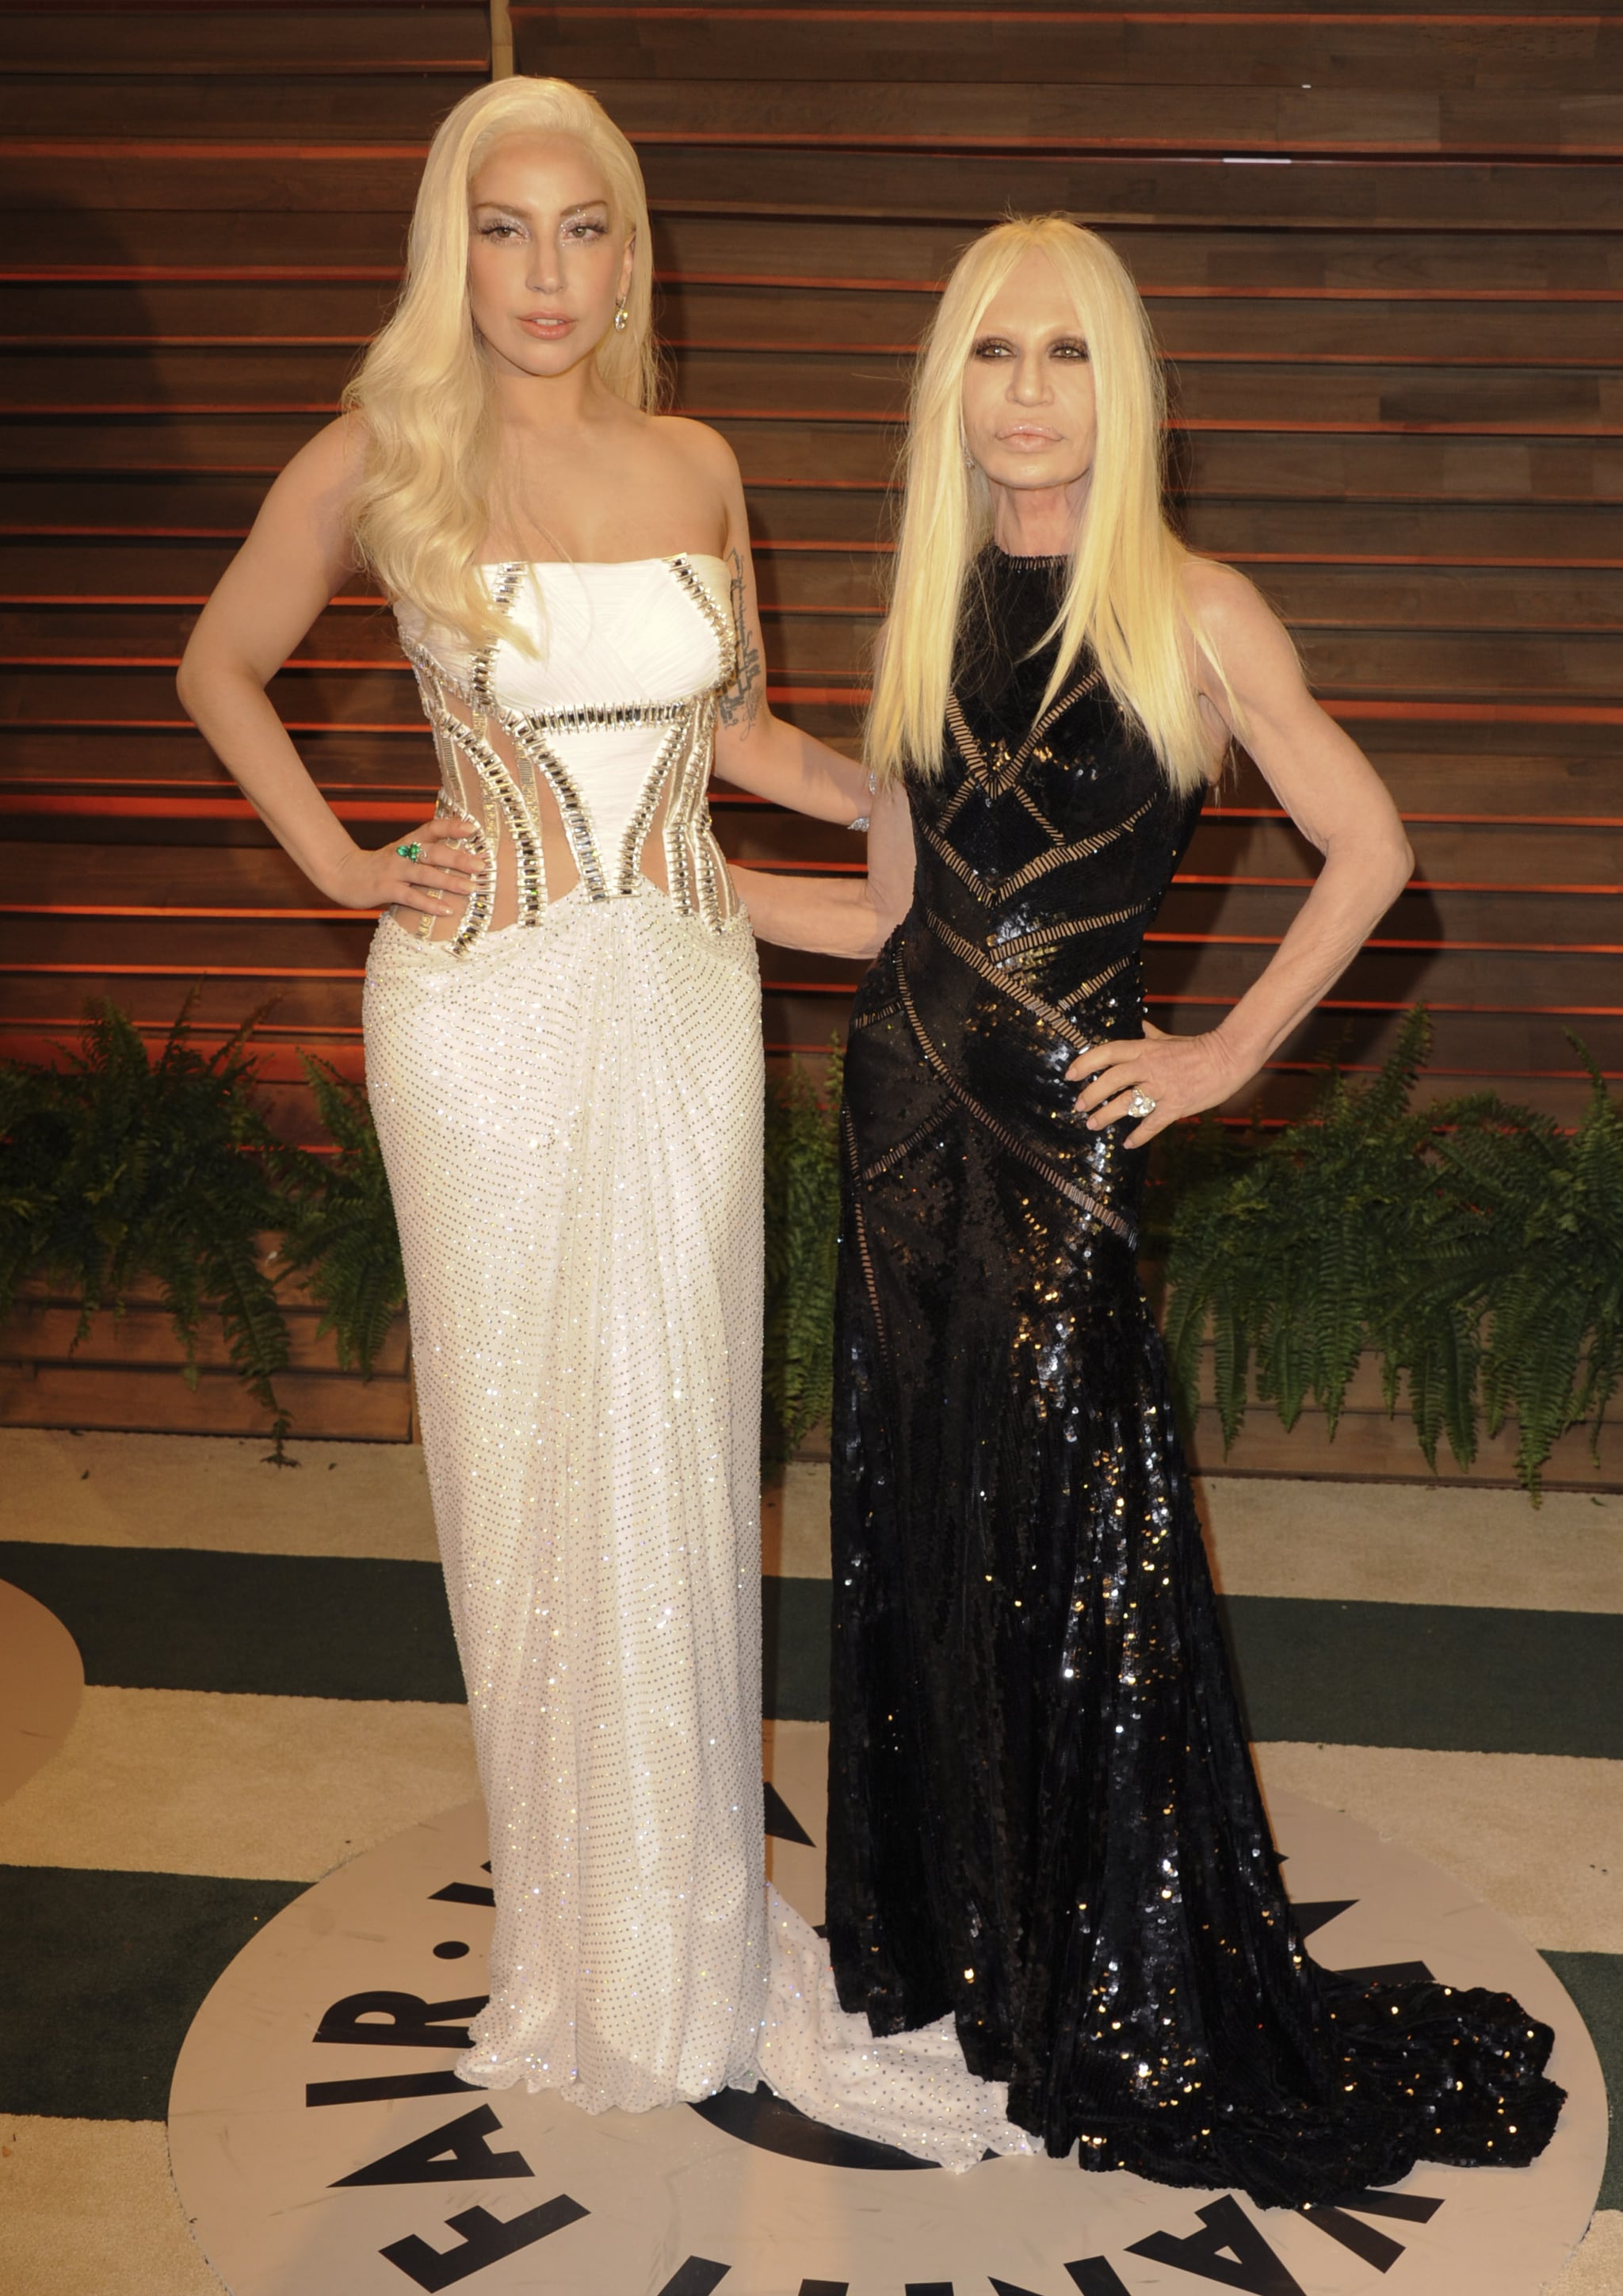 lady-gaga-donatella-versace-partied-together